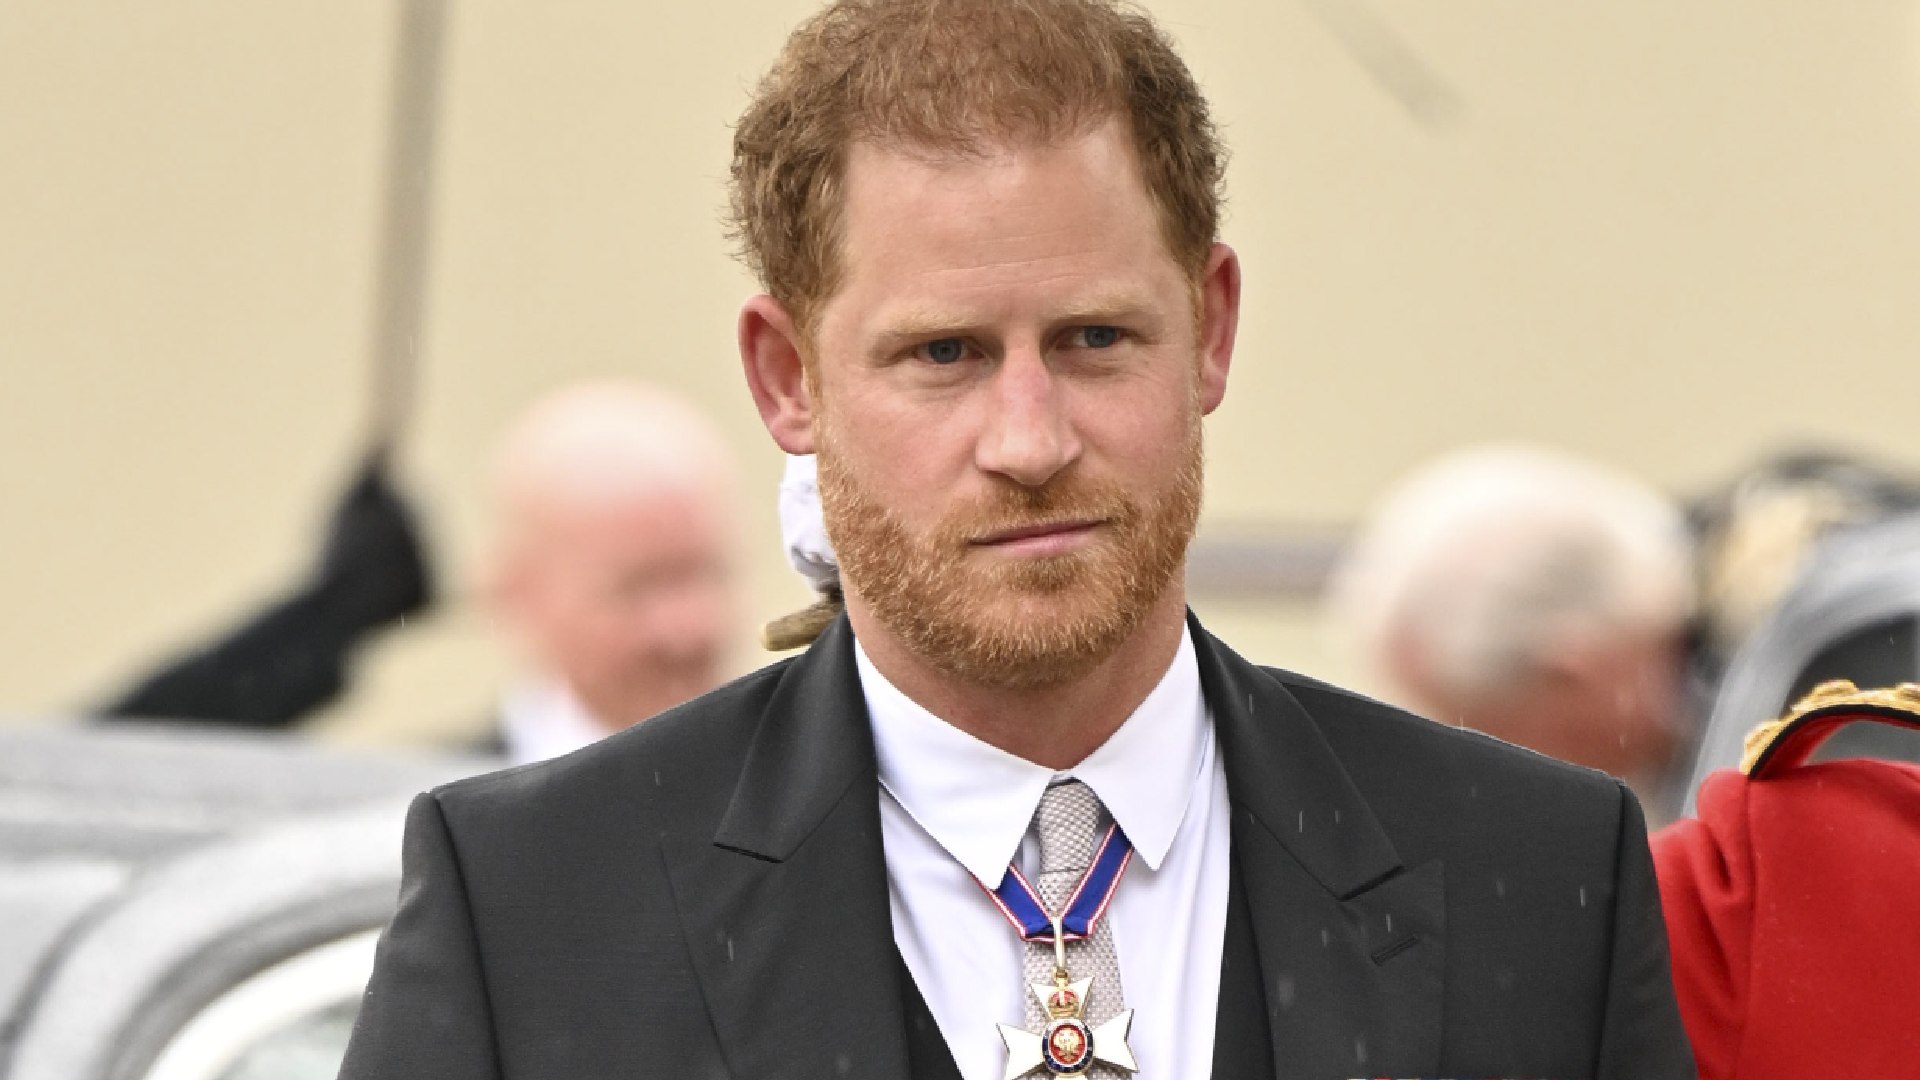 Prince Harry Felt ‘No One Could Help’ Him When Diana Passed